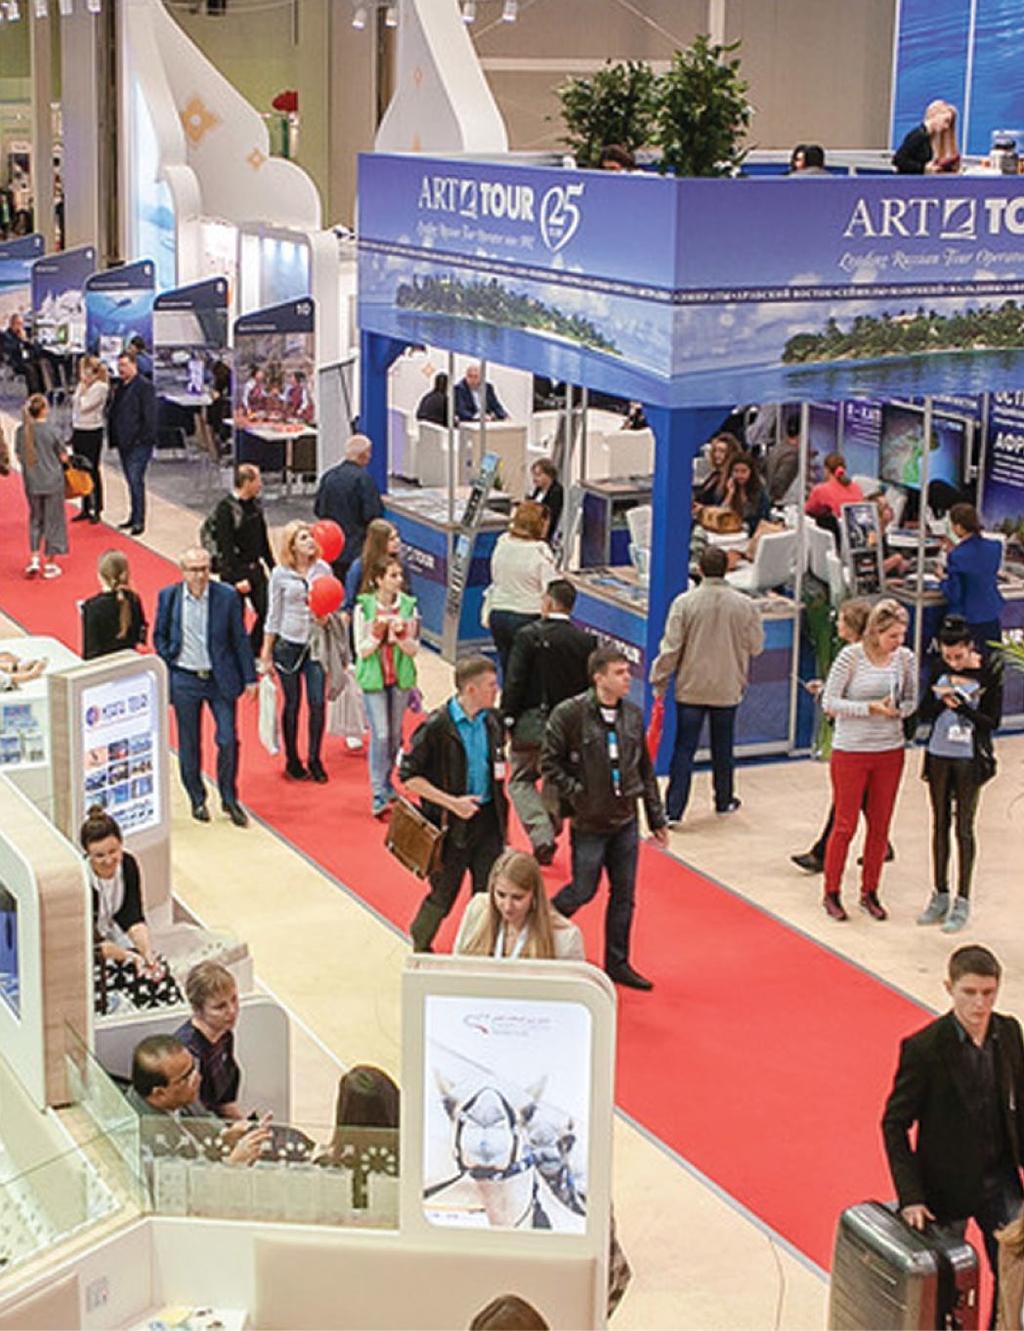 BUSINESS PROGRAMME The OTDYKH organizers offer a large-scale business programme. In 2017 three intensive days included over 30 business events, attracting 180 experts and 2000 delegates.